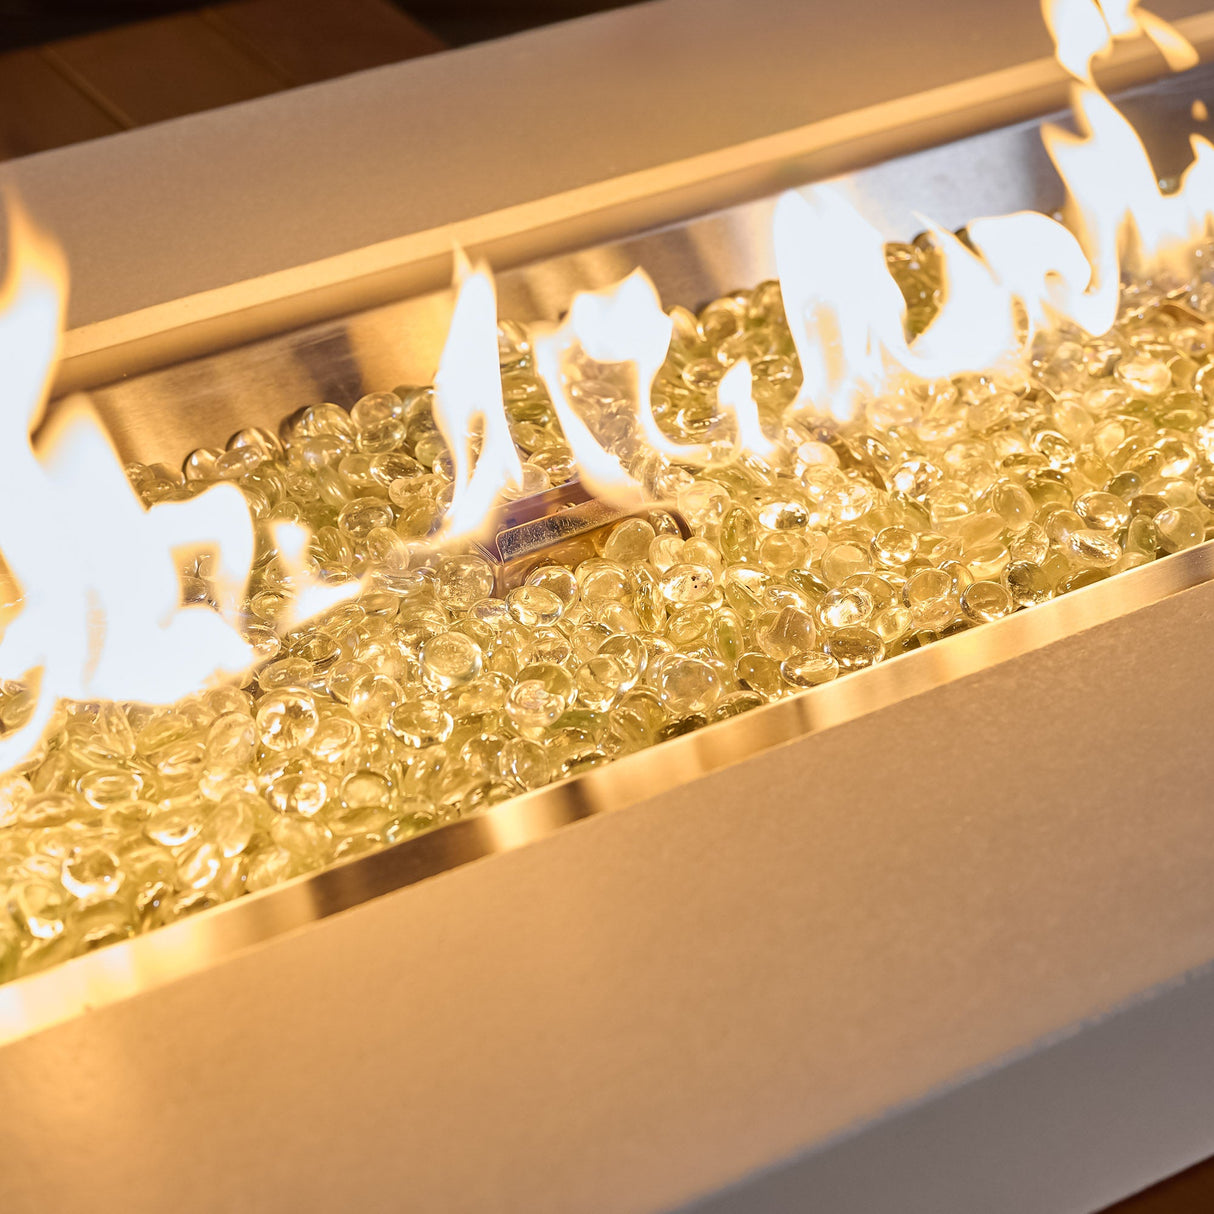 A close up of the flame produced by the Uptown Iroko Linear Gas Fire Pit Table